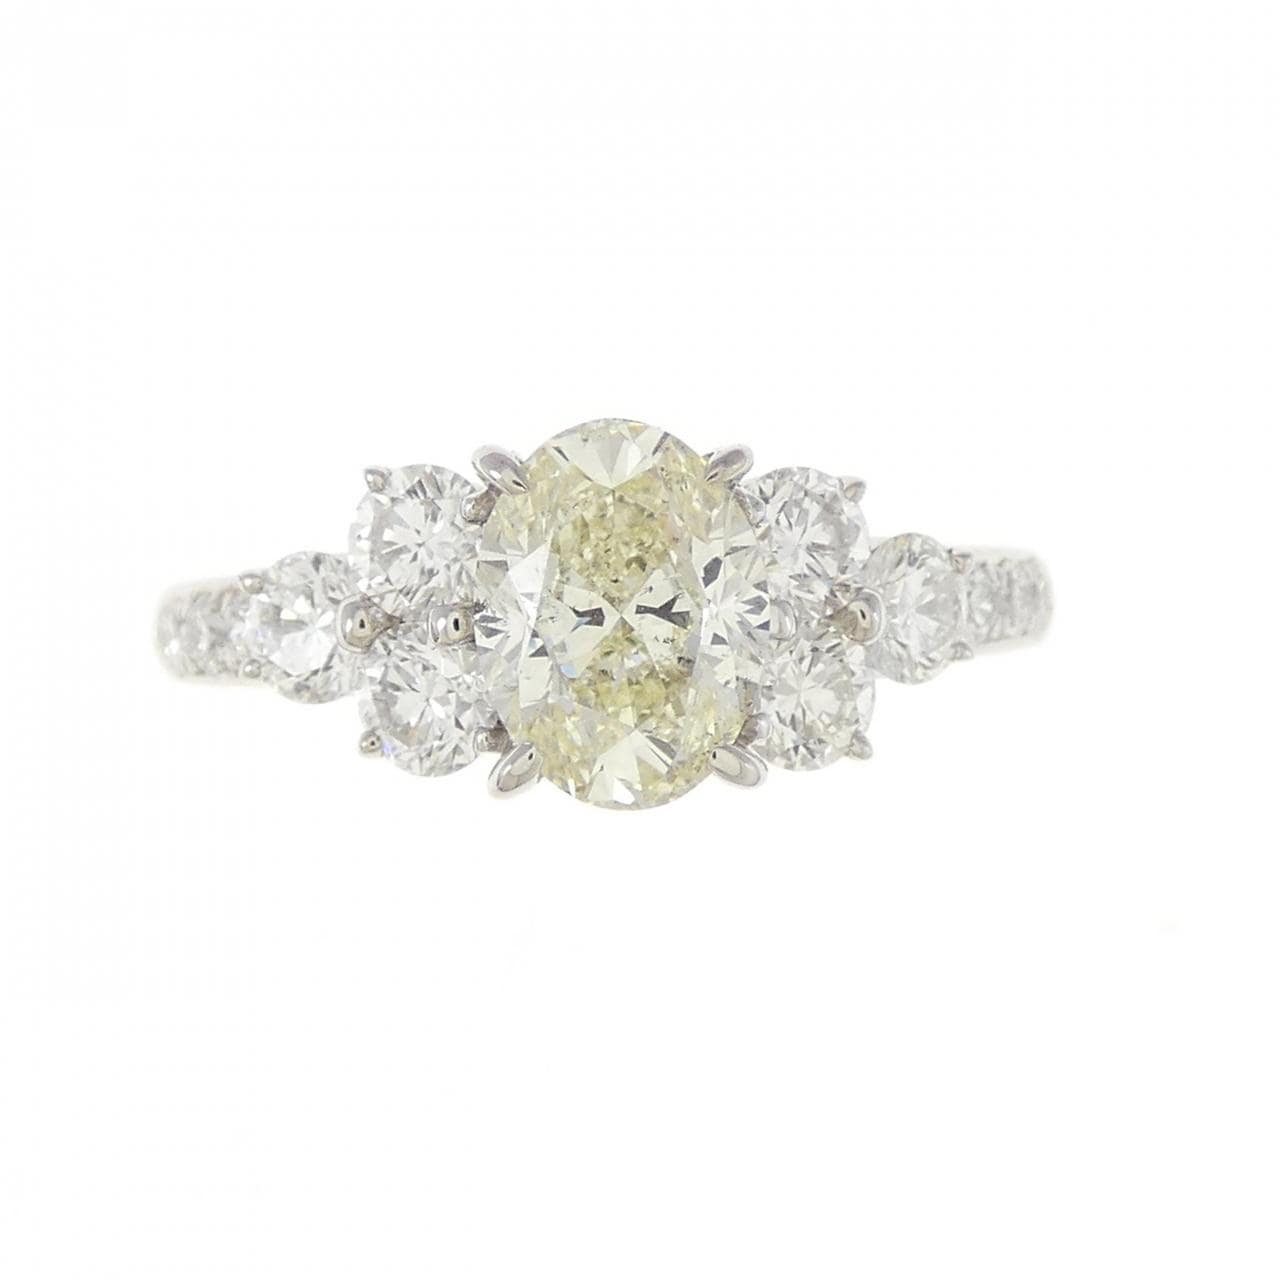 PT Diamond Ring 1.200CT VLY SI2 Oval Cut